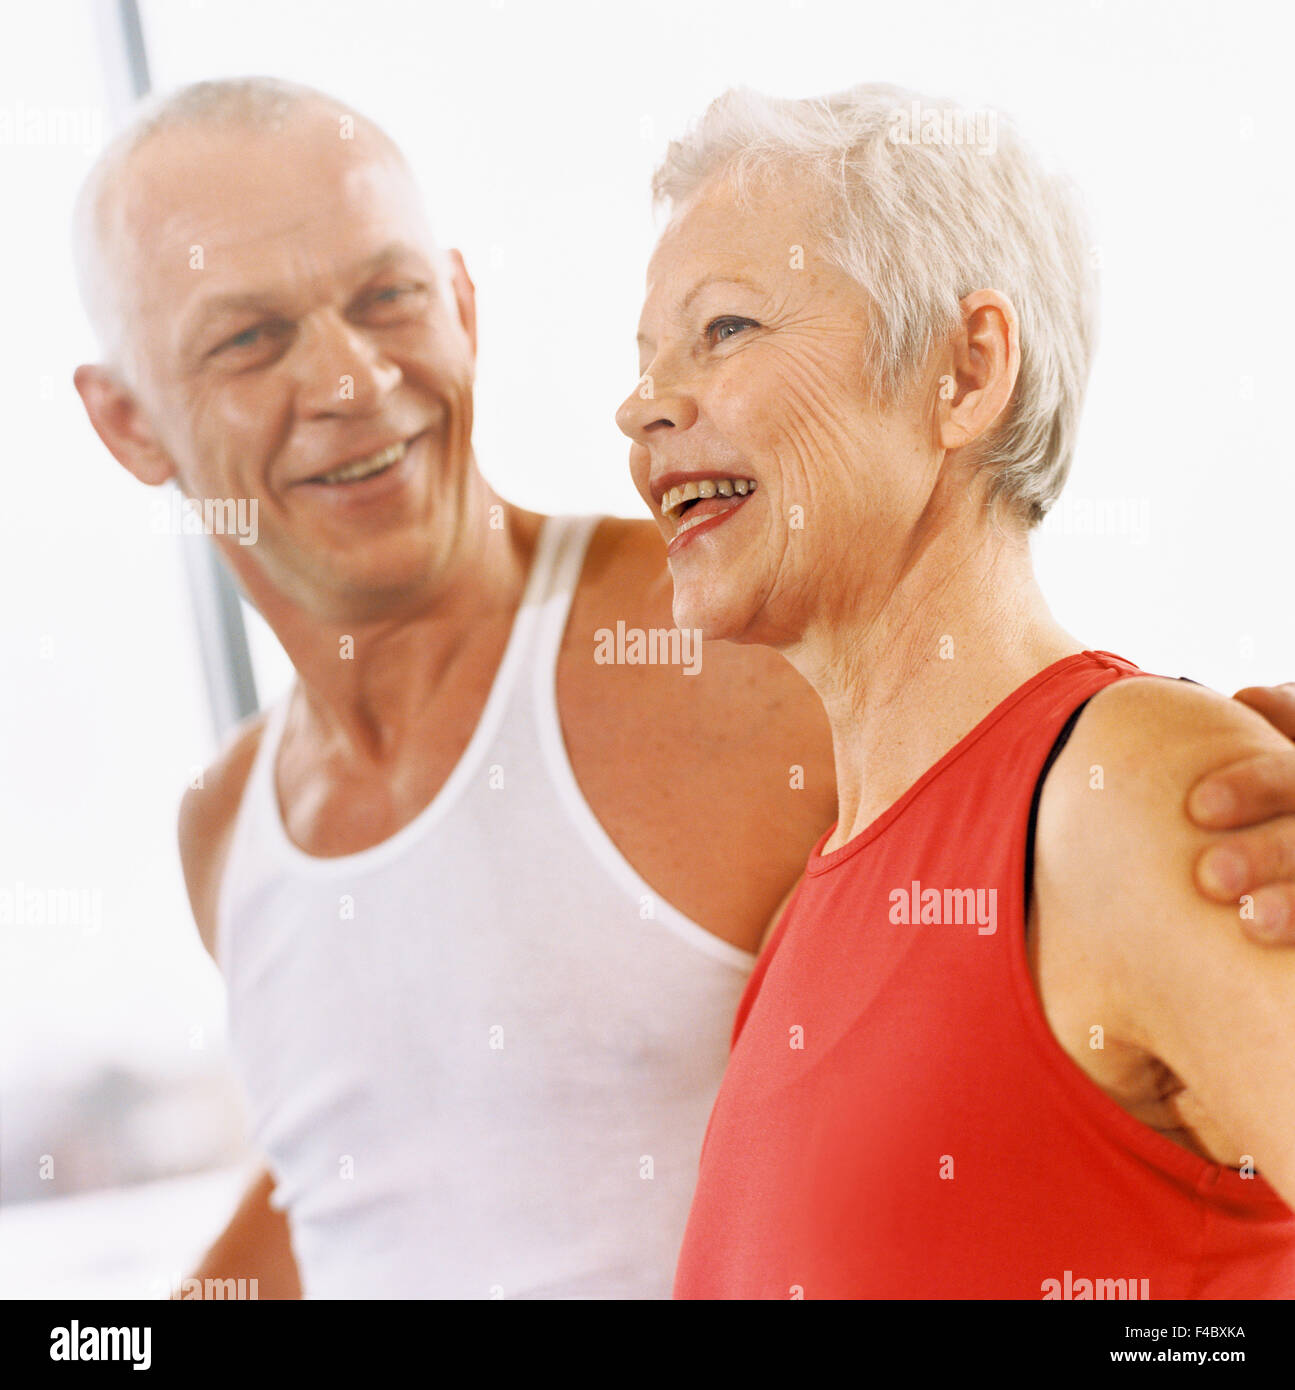 70-74 years 75-79 years activity adults only athlete bodybuilding color image elderly man elderly woman exercising feelings gym Stock Photo